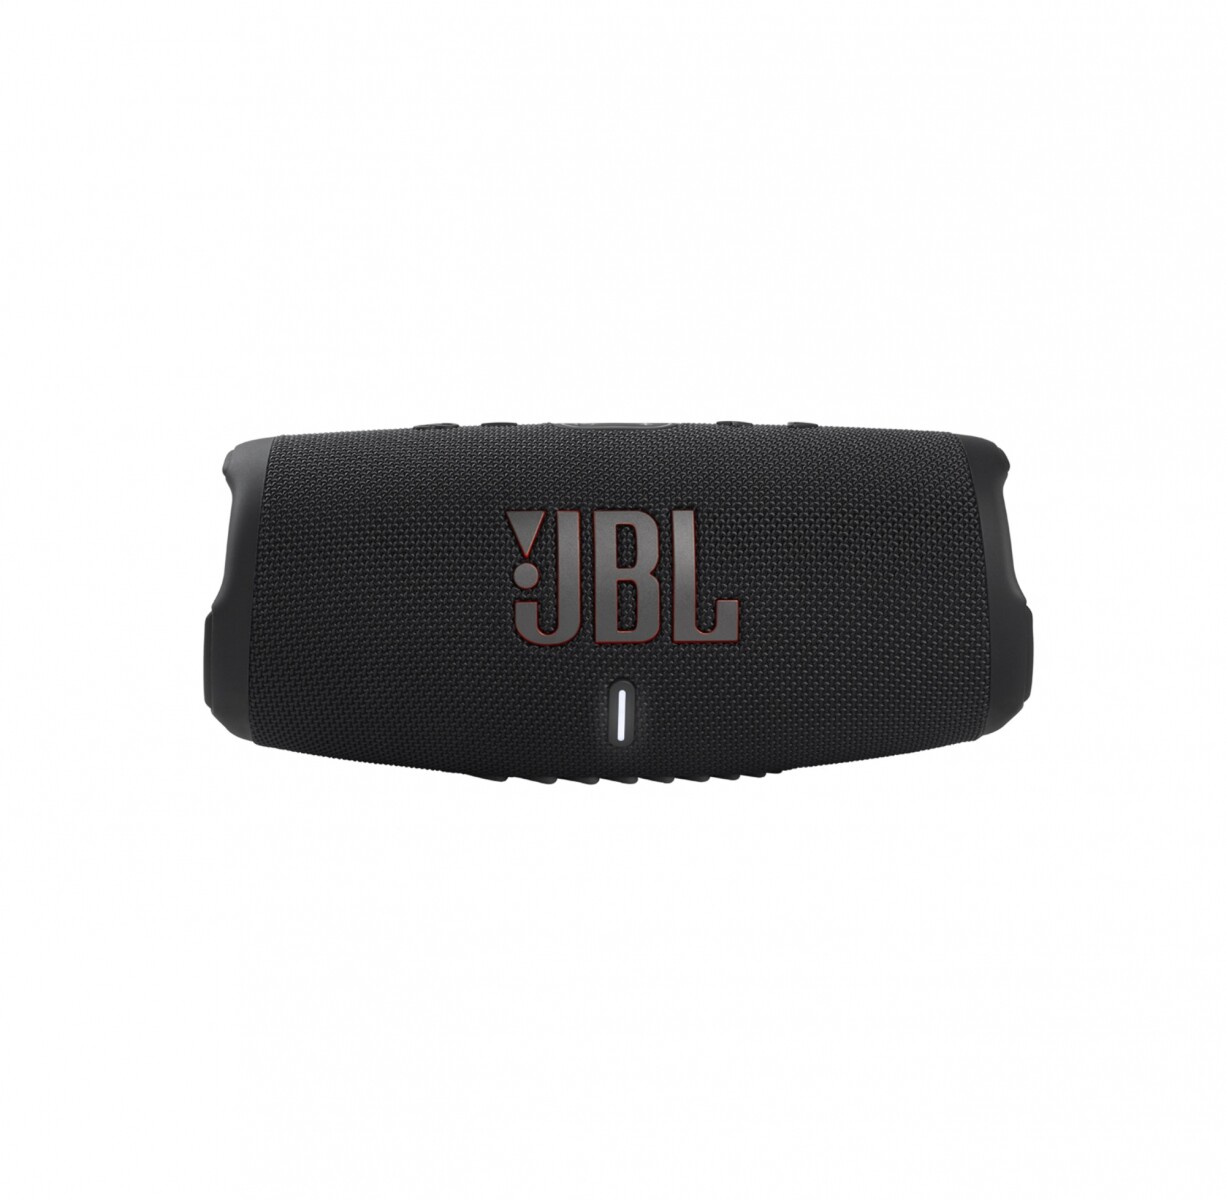 Parlante Inalámbrico Bluetooth JBL Charge 5 - Negro 